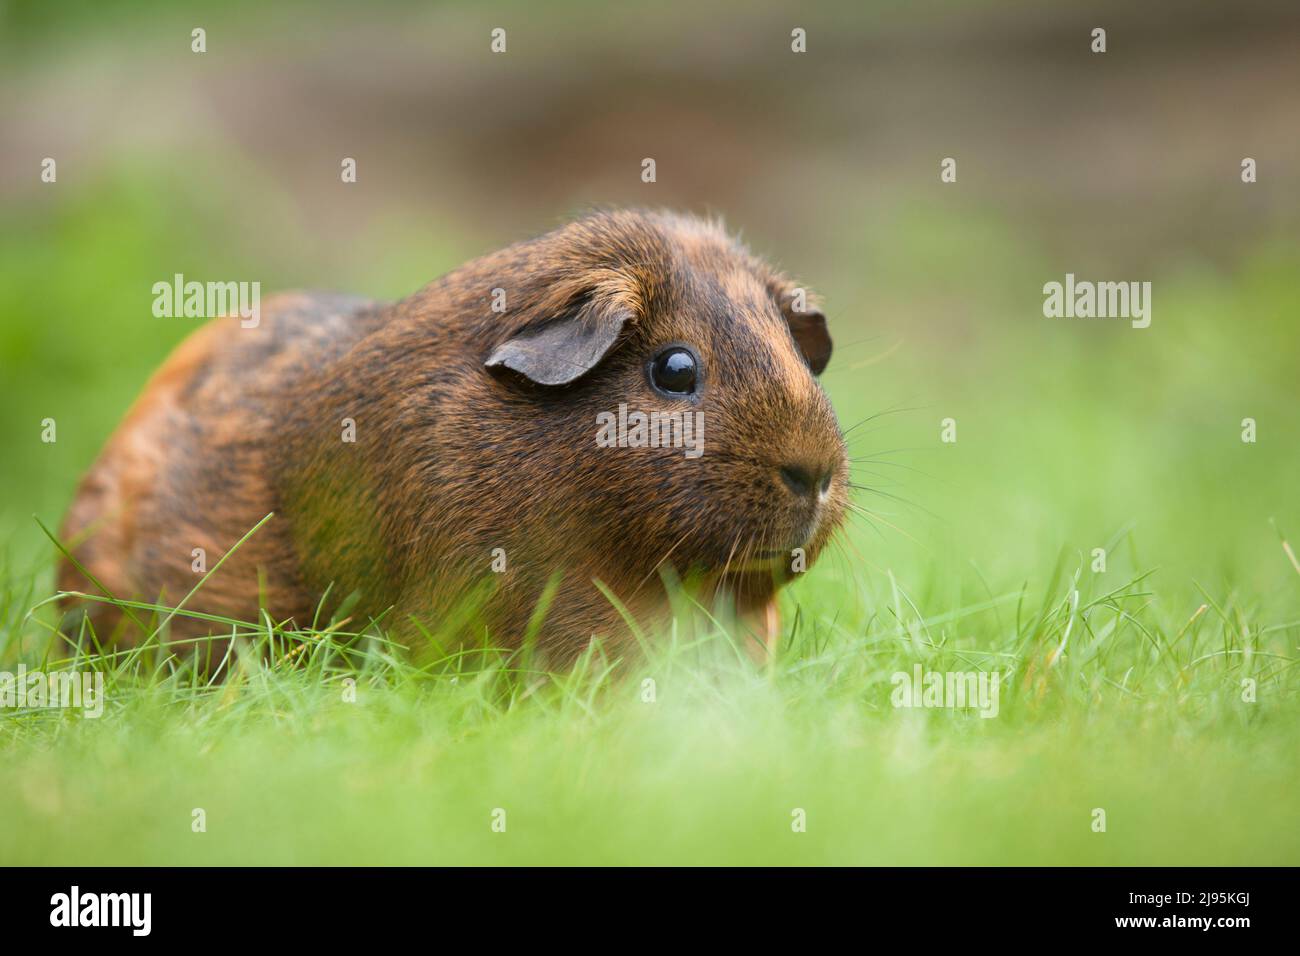 Adult female American Guinea Pig with dark brown and light brown coat. Stock Photo